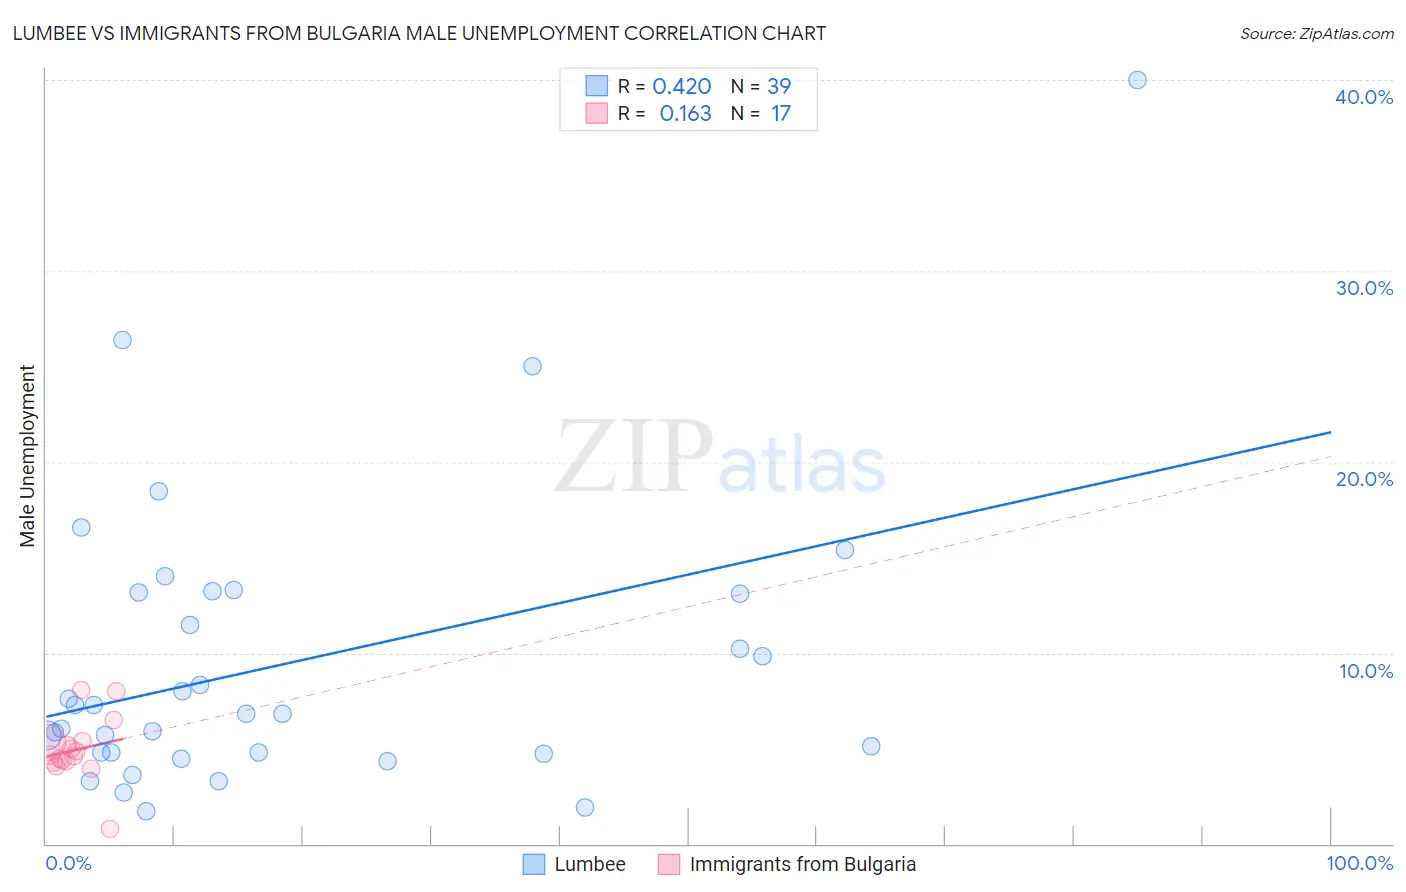 Lumbee vs Immigrants from Bulgaria Male Unemployment